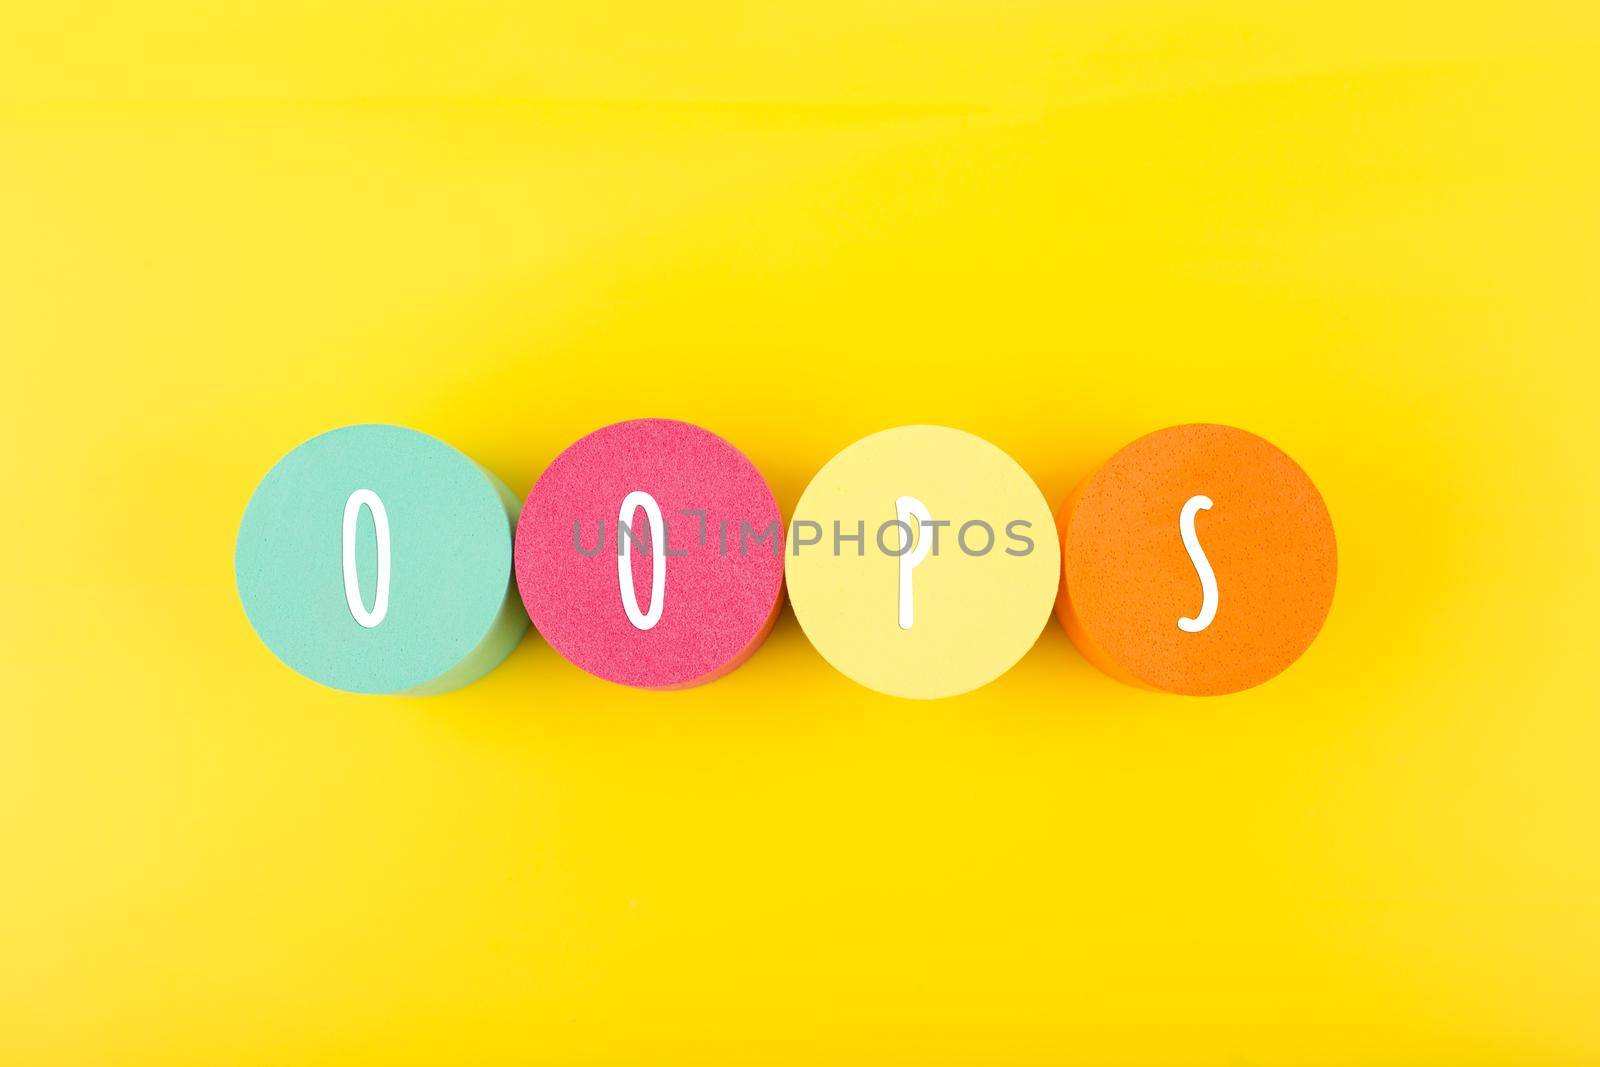 Word oops written on colorful round geometric against yellow background. Trendy minimal concept of emotions expression or excitement